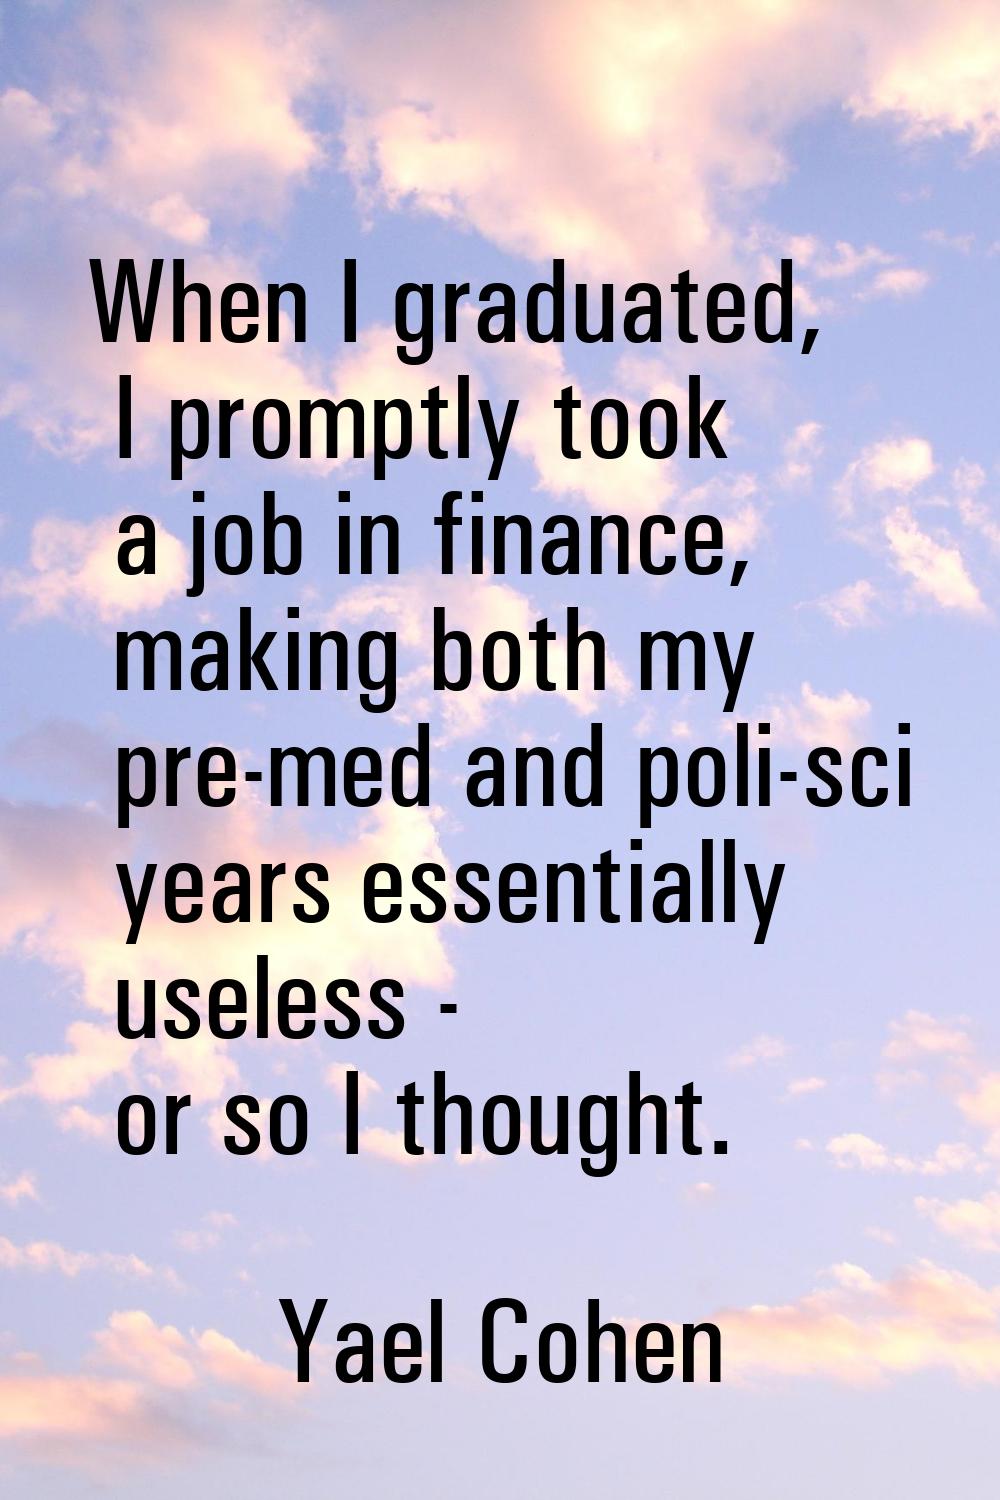 When I graduated, I promptly took a job in finance, making both my pre-med and poli-sci years essen